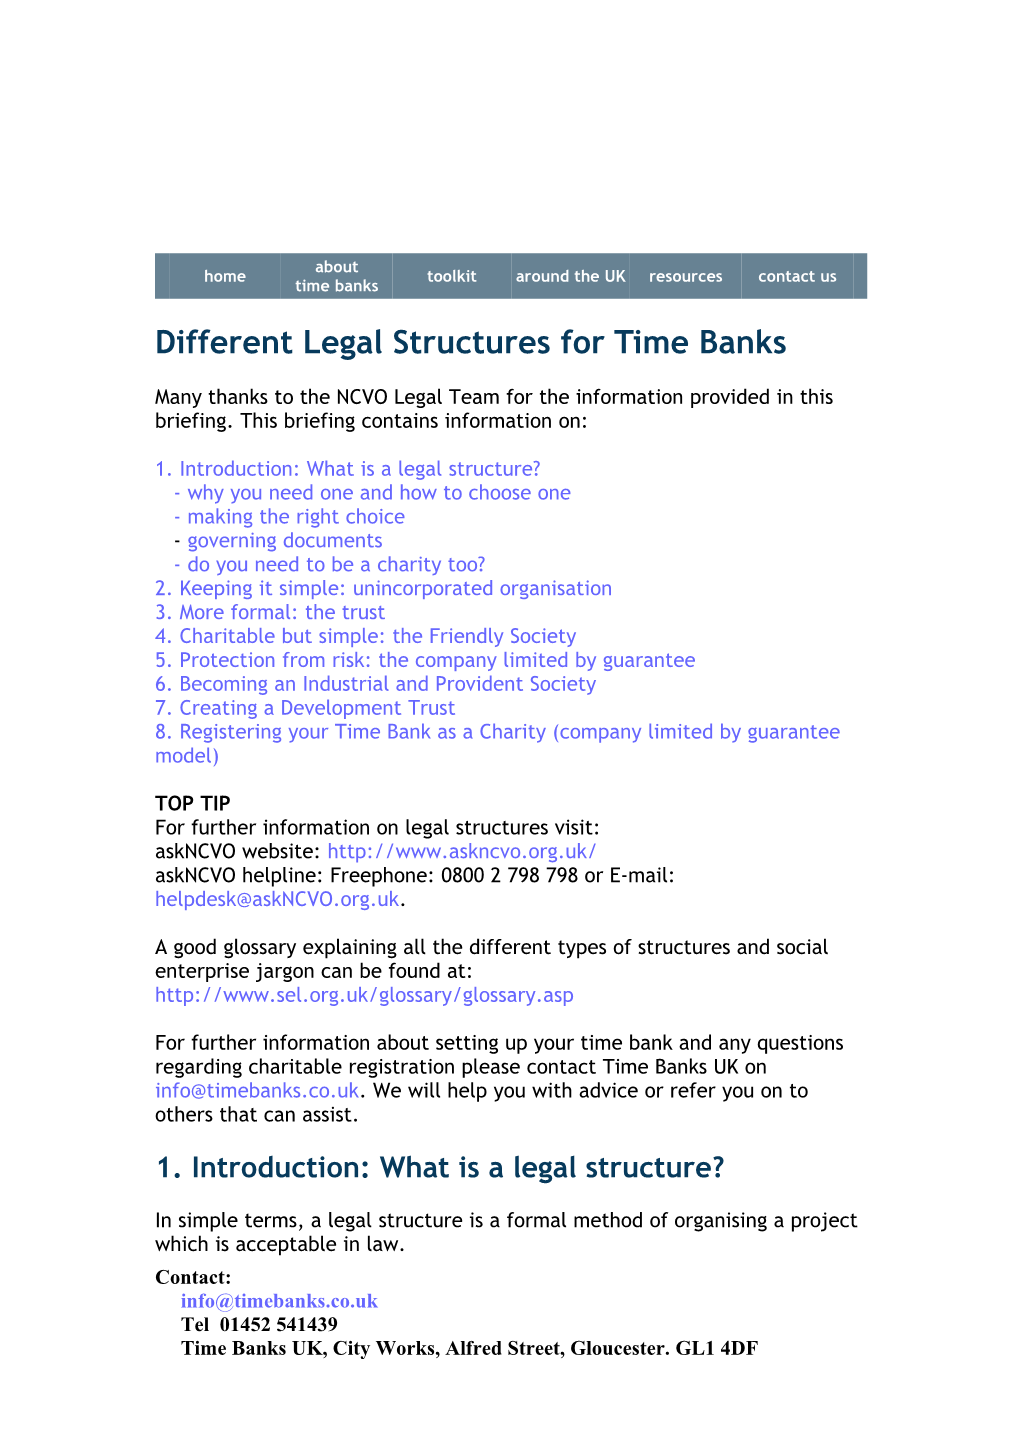 Different Legal Structures for Time Banks